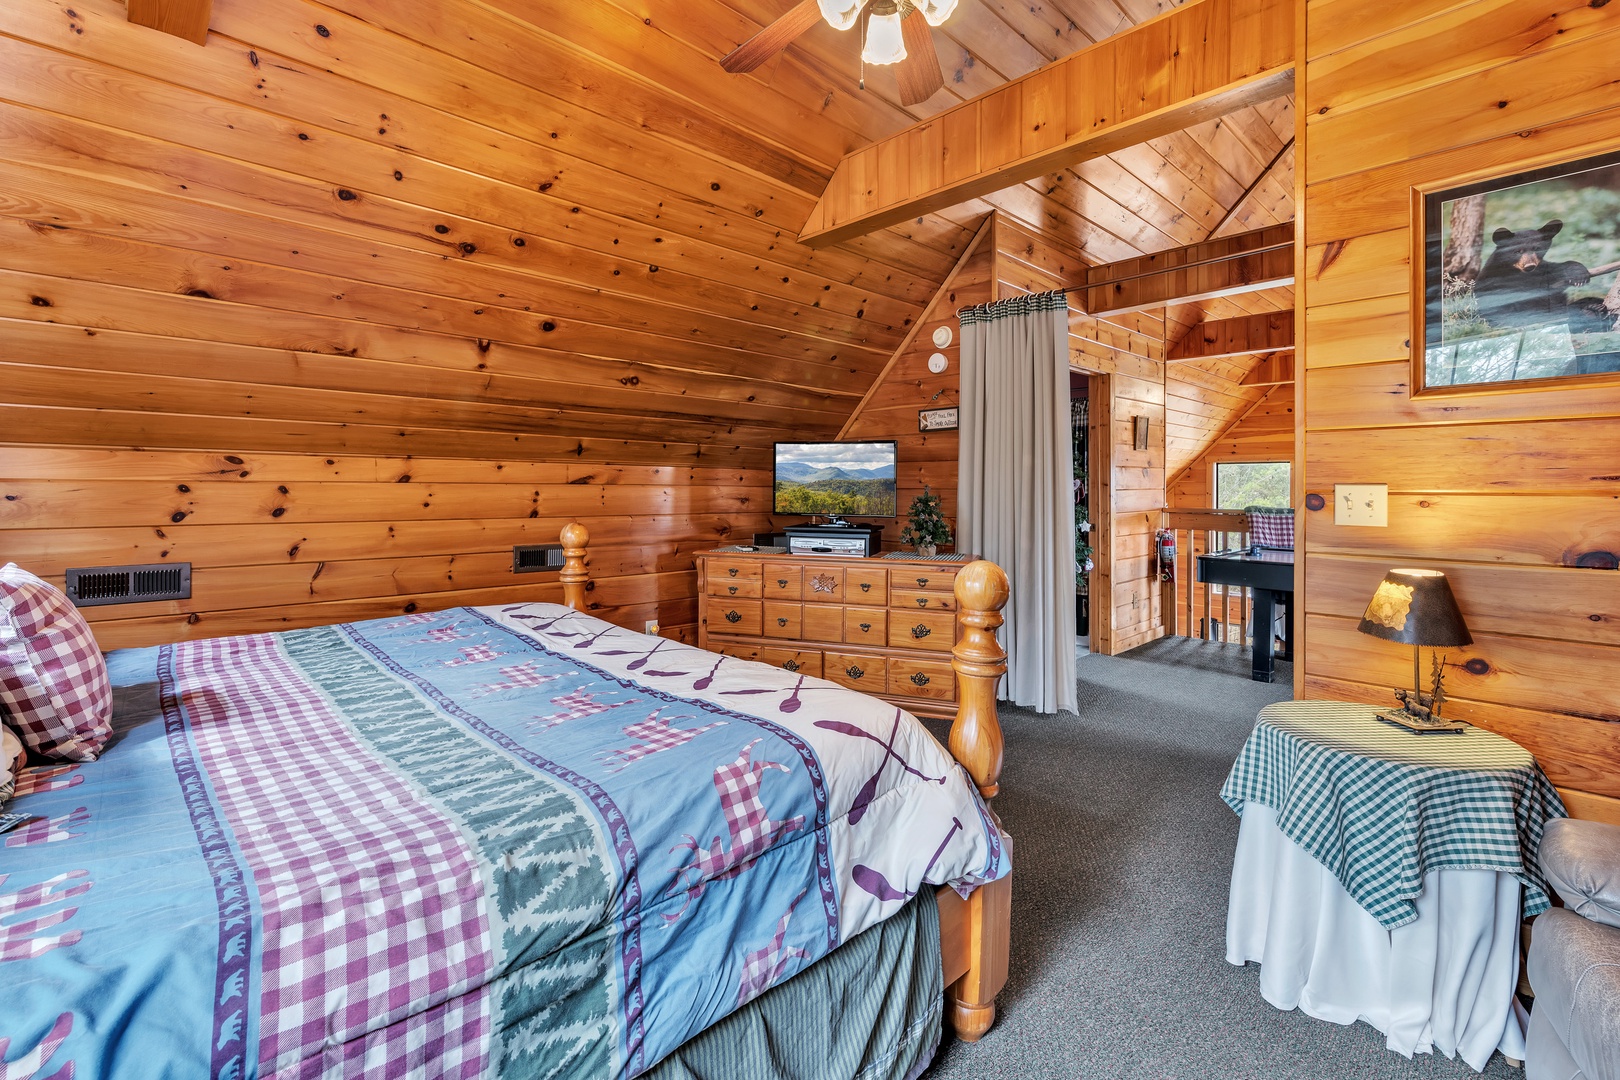 The loft sleeping area includes a king bed, full futon, cozy recliner, & Smart TV